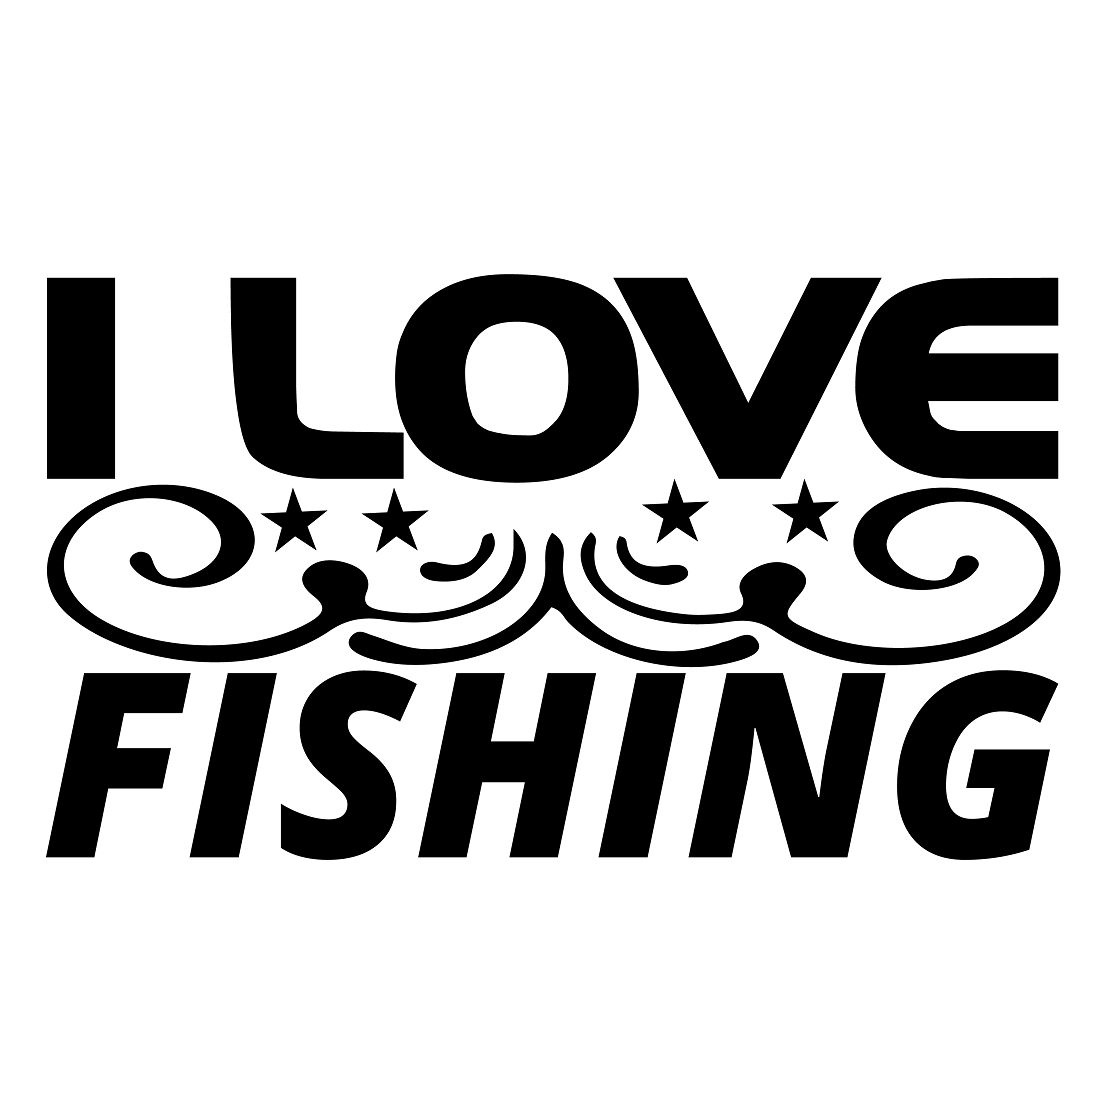 I Love fishing preview image.